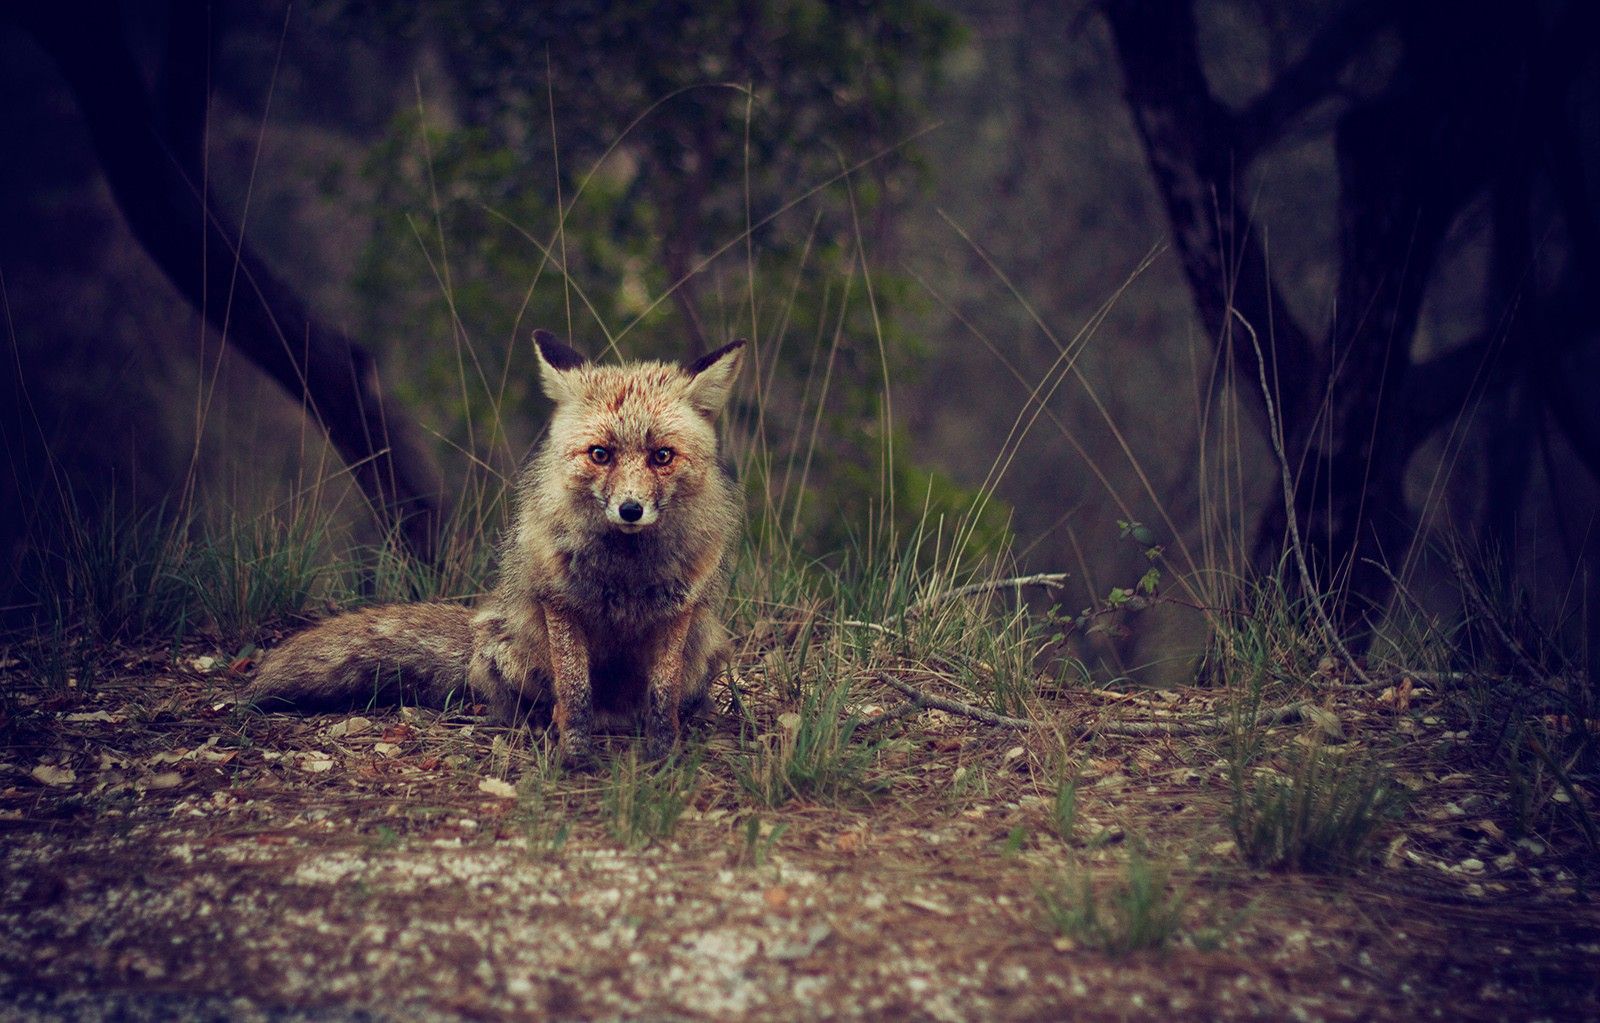 Forest, Animal, Wilderness, Fox, High Quality Animal Photo, Widescreen Picture Of Animals, Pets, Animal Wallpaper Of Windows, Download An